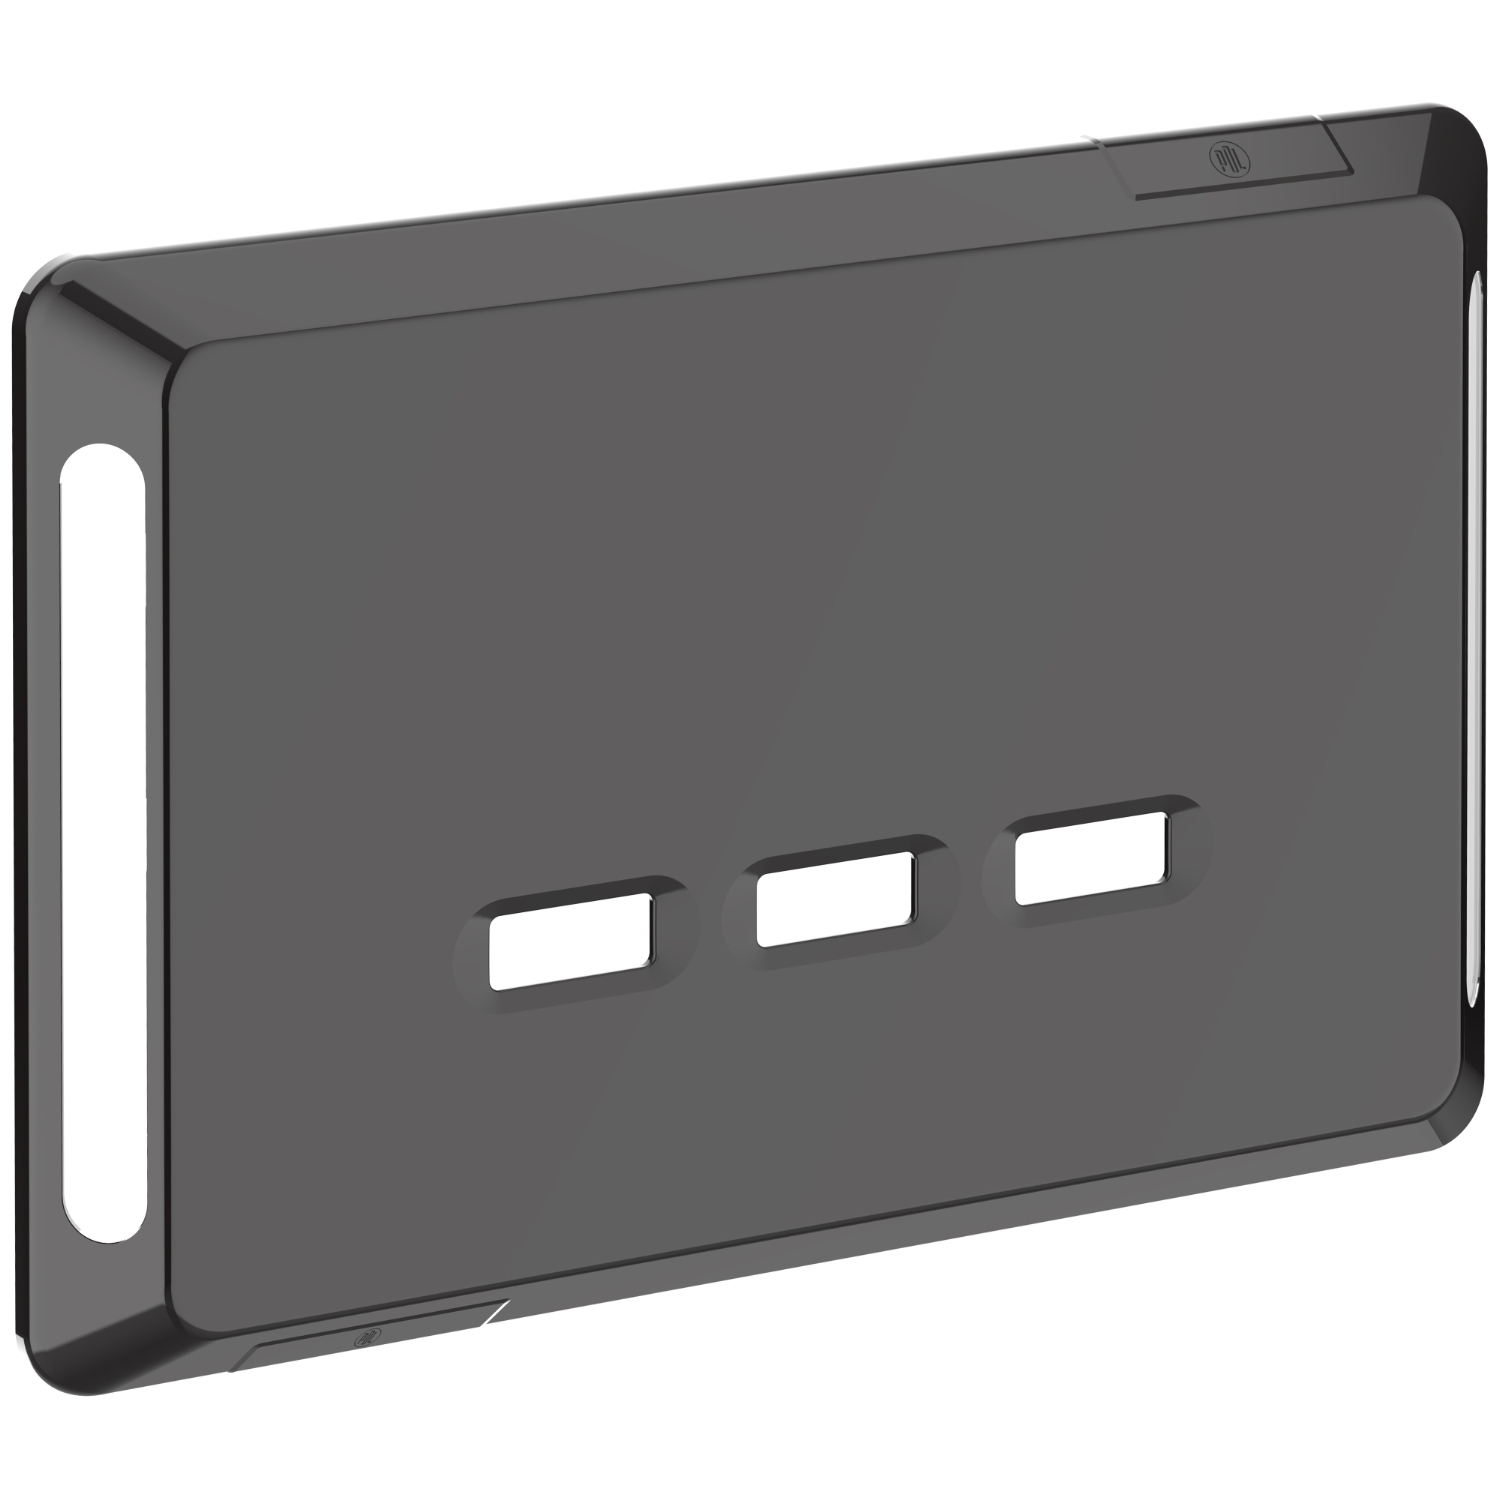 PDL Pro Series - Cover Plate USB Charger Type A 2.1A 3-Gang - Black